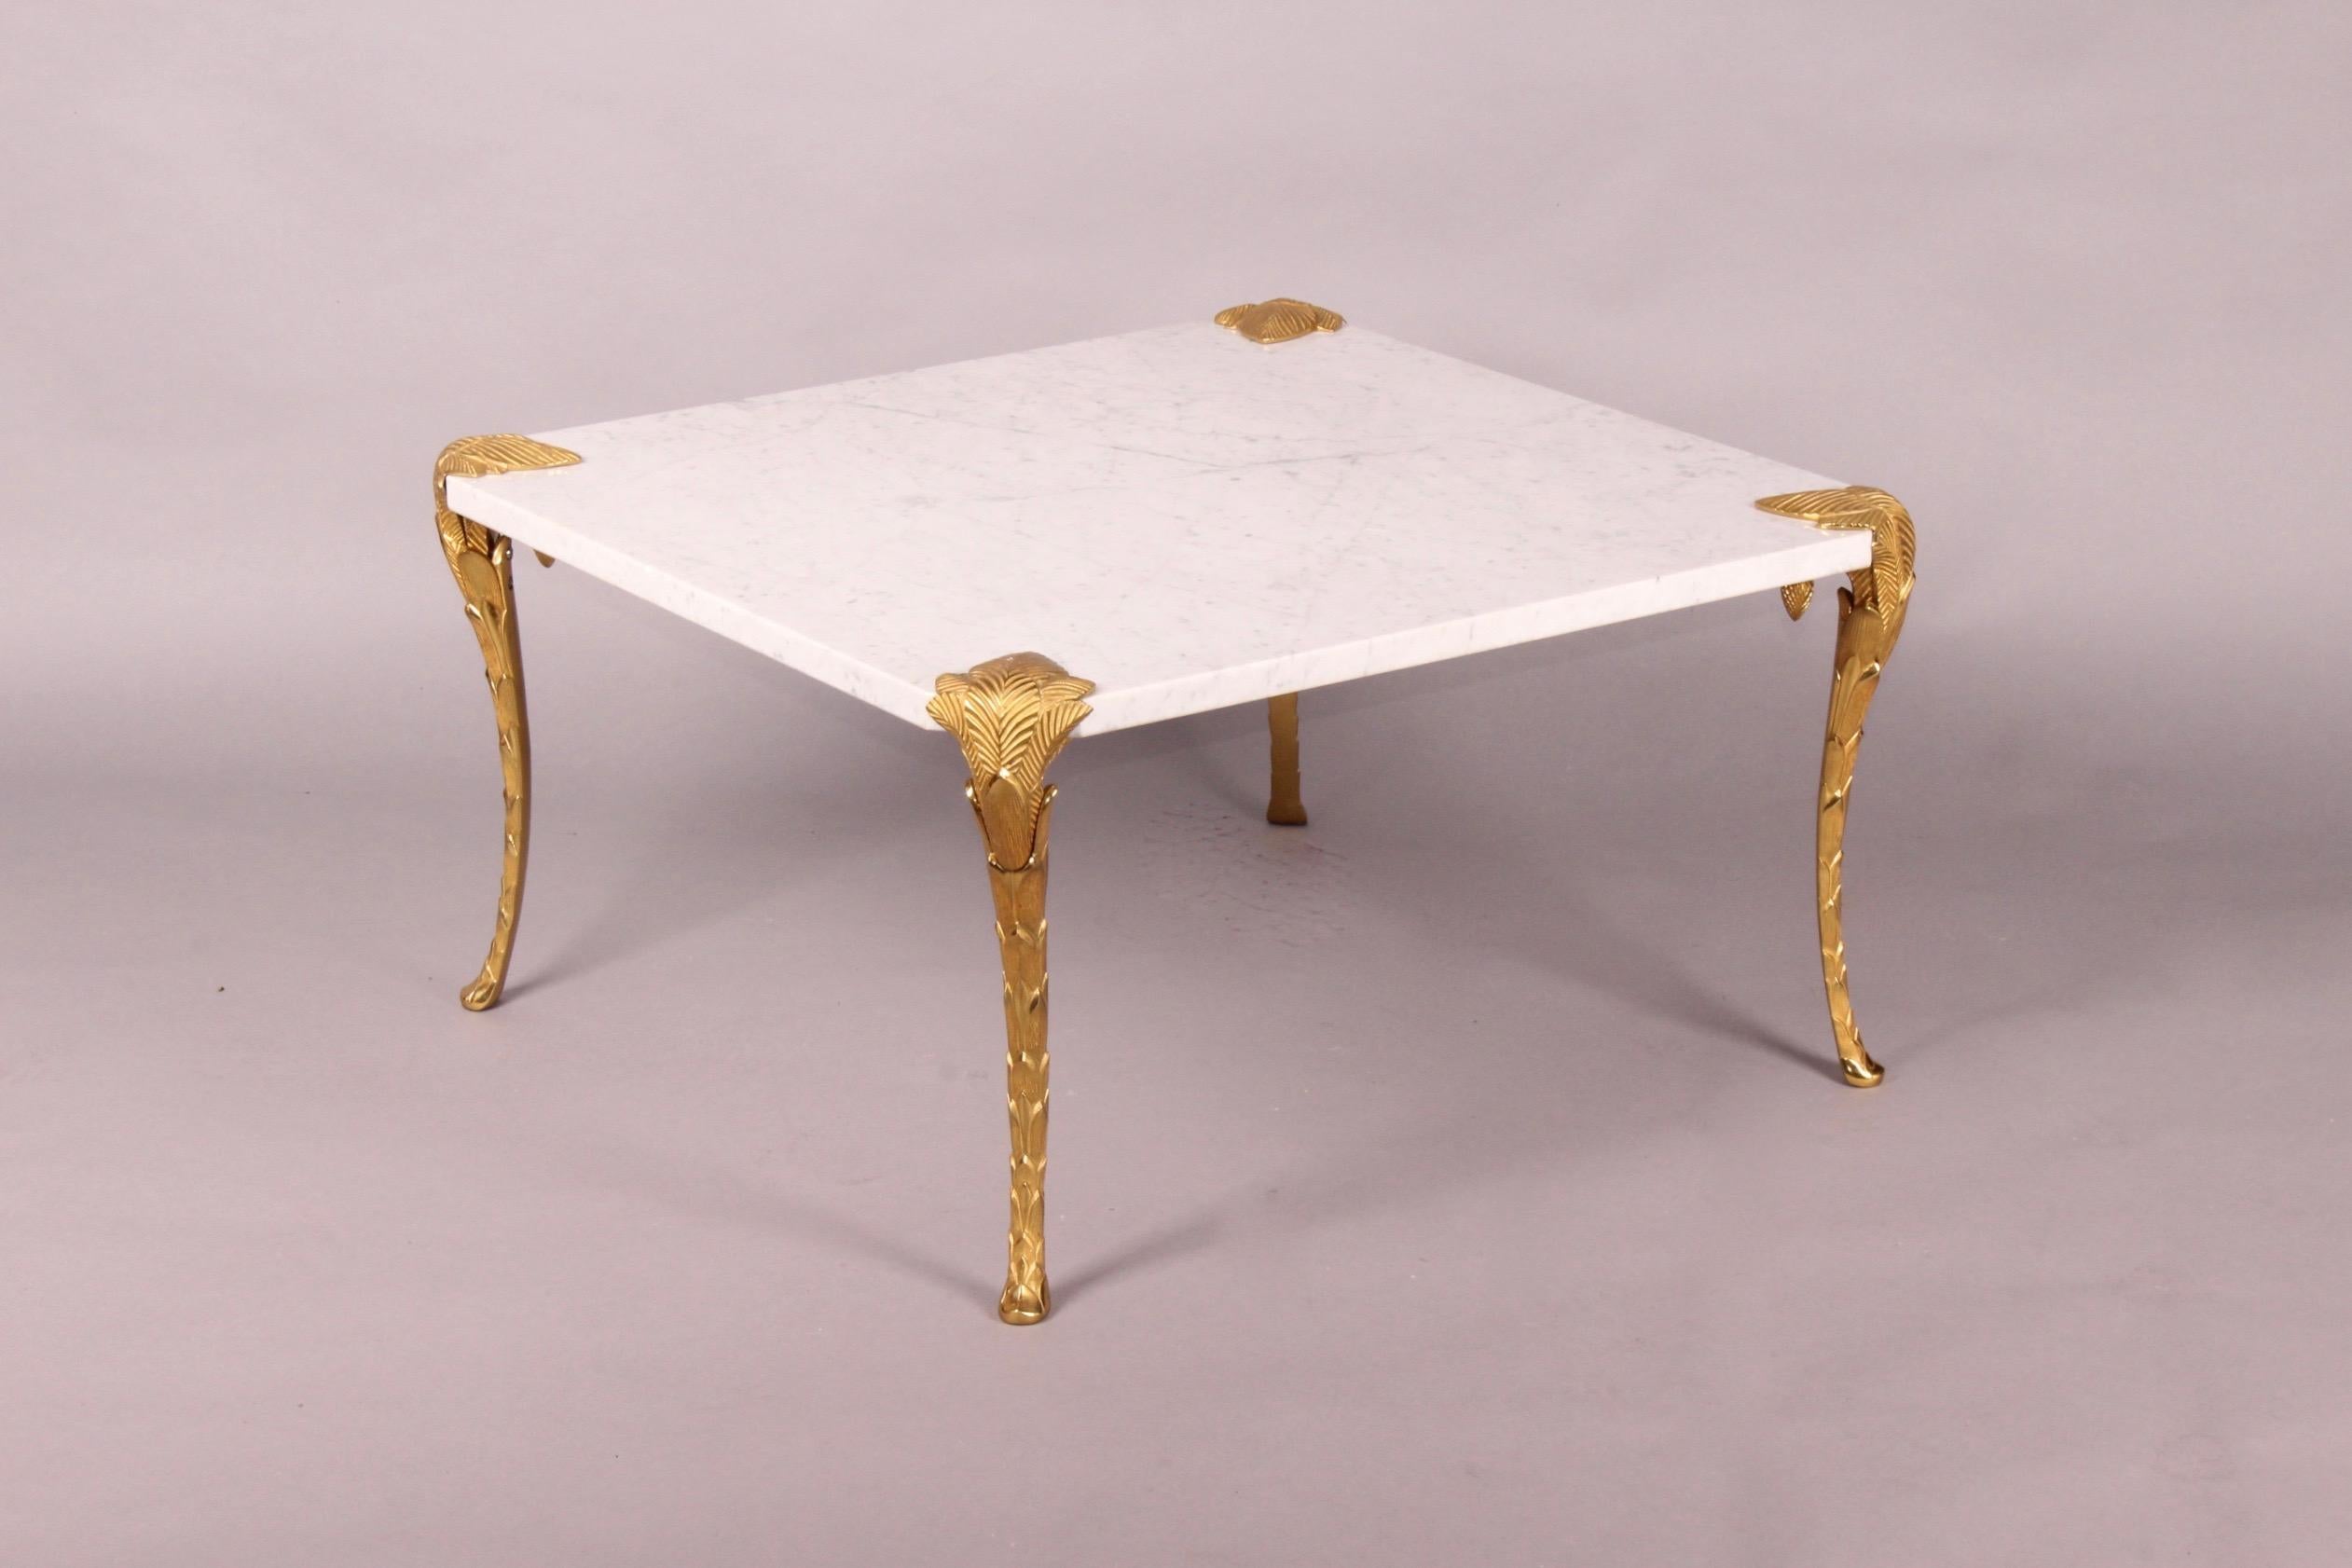 Maison Charles bronze and marble coffee table.